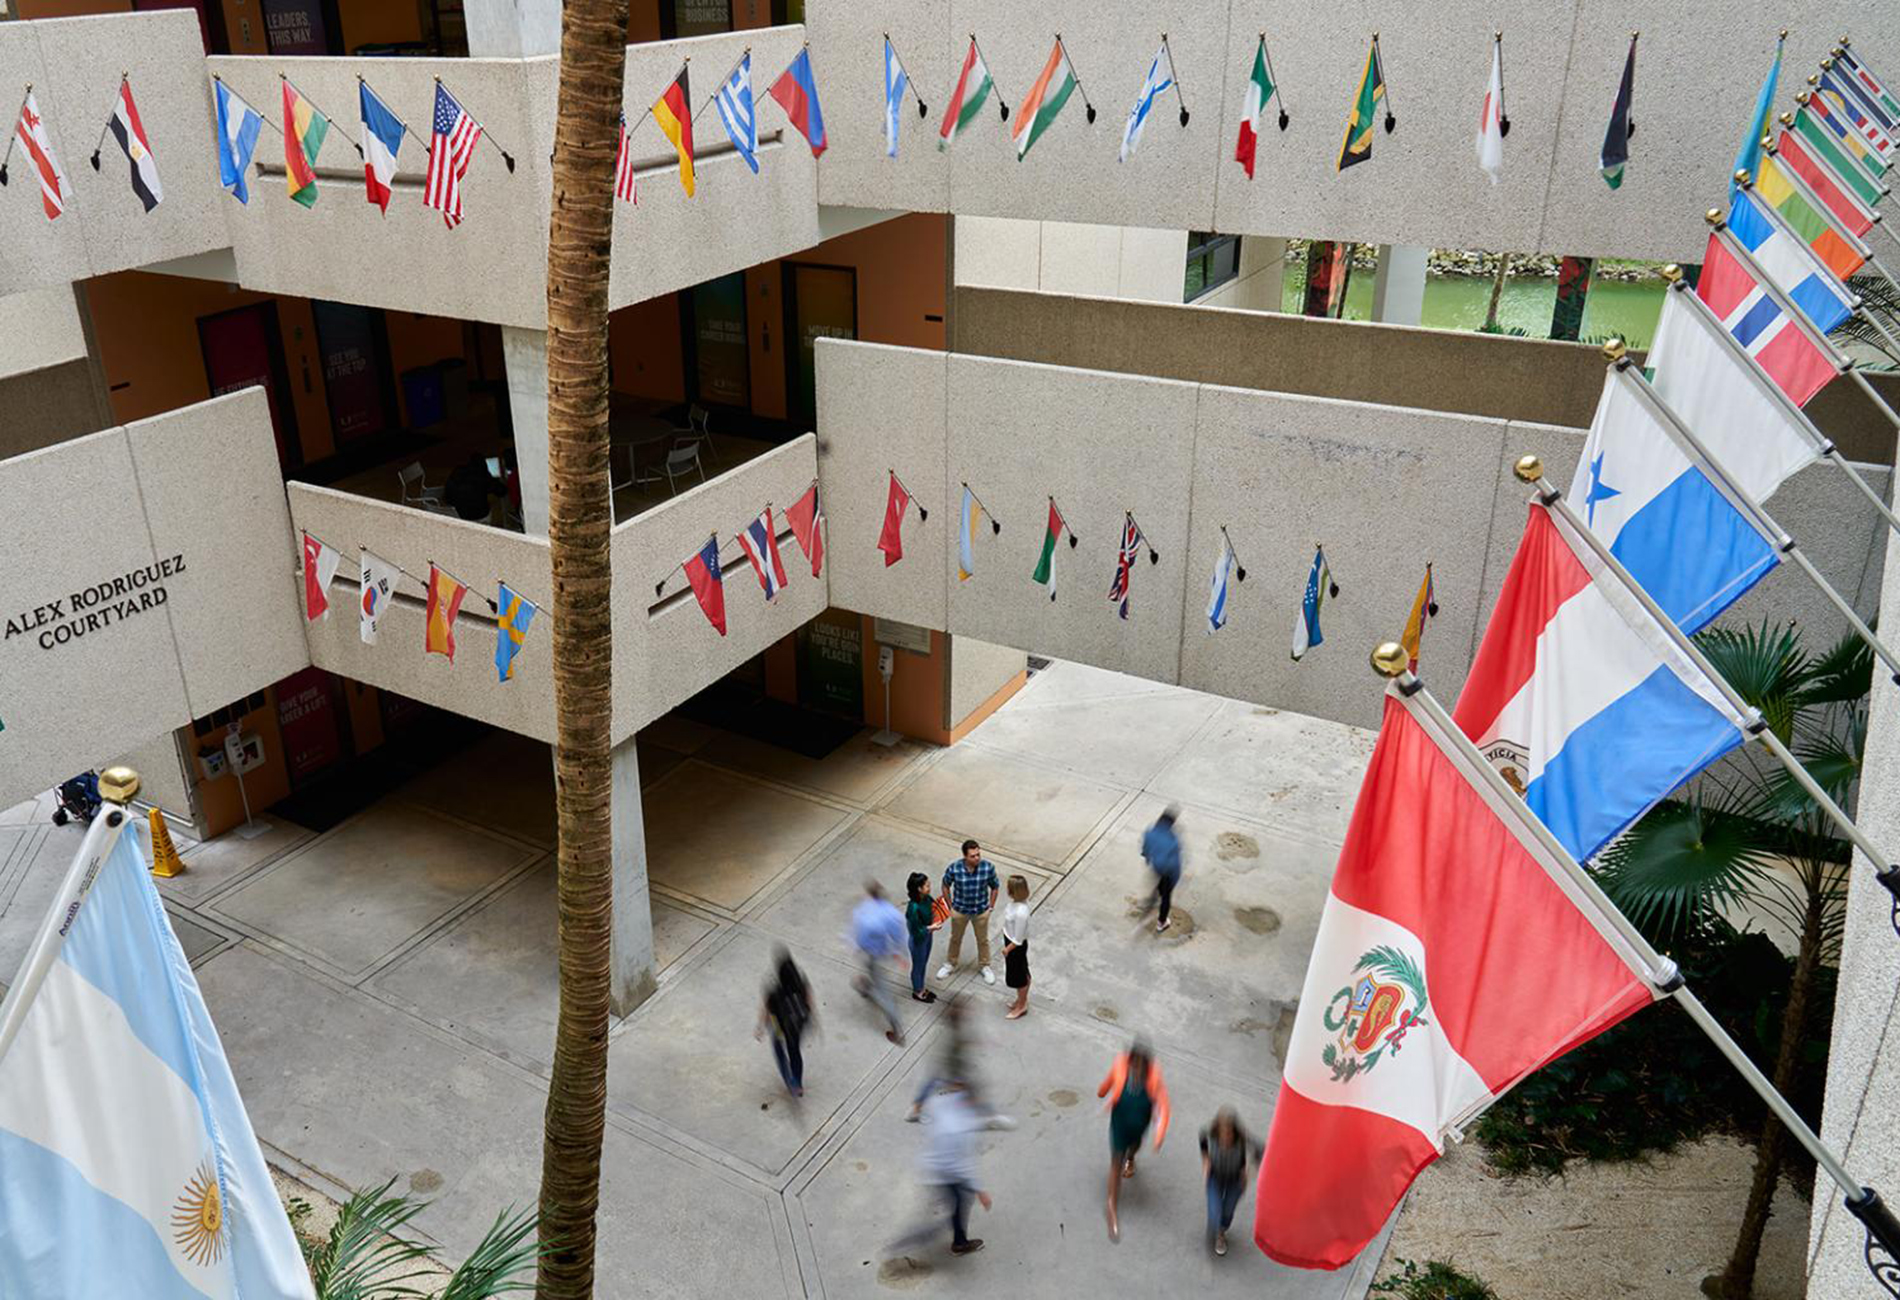 Bird's eye view from the second floor of Miami Herbert Business School Building showing the flags of different countries.